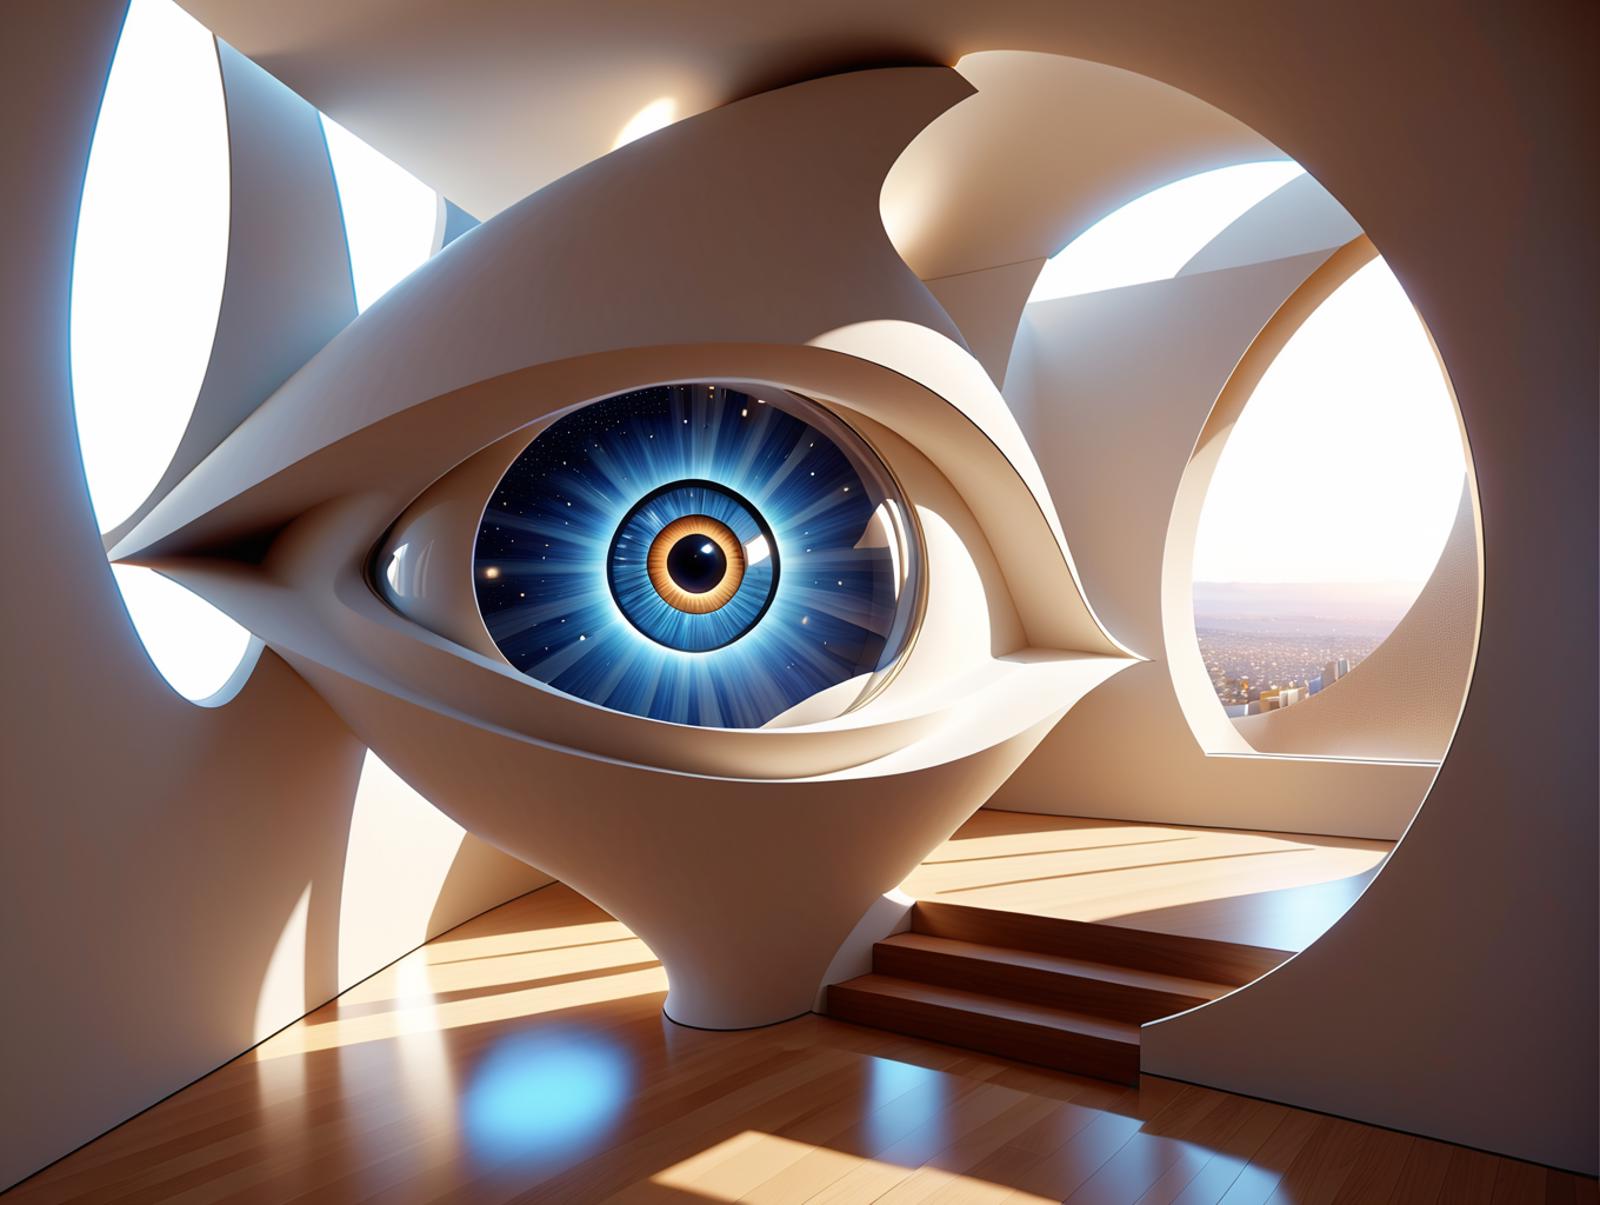 A futuristic room with a large blue eye and a city view.